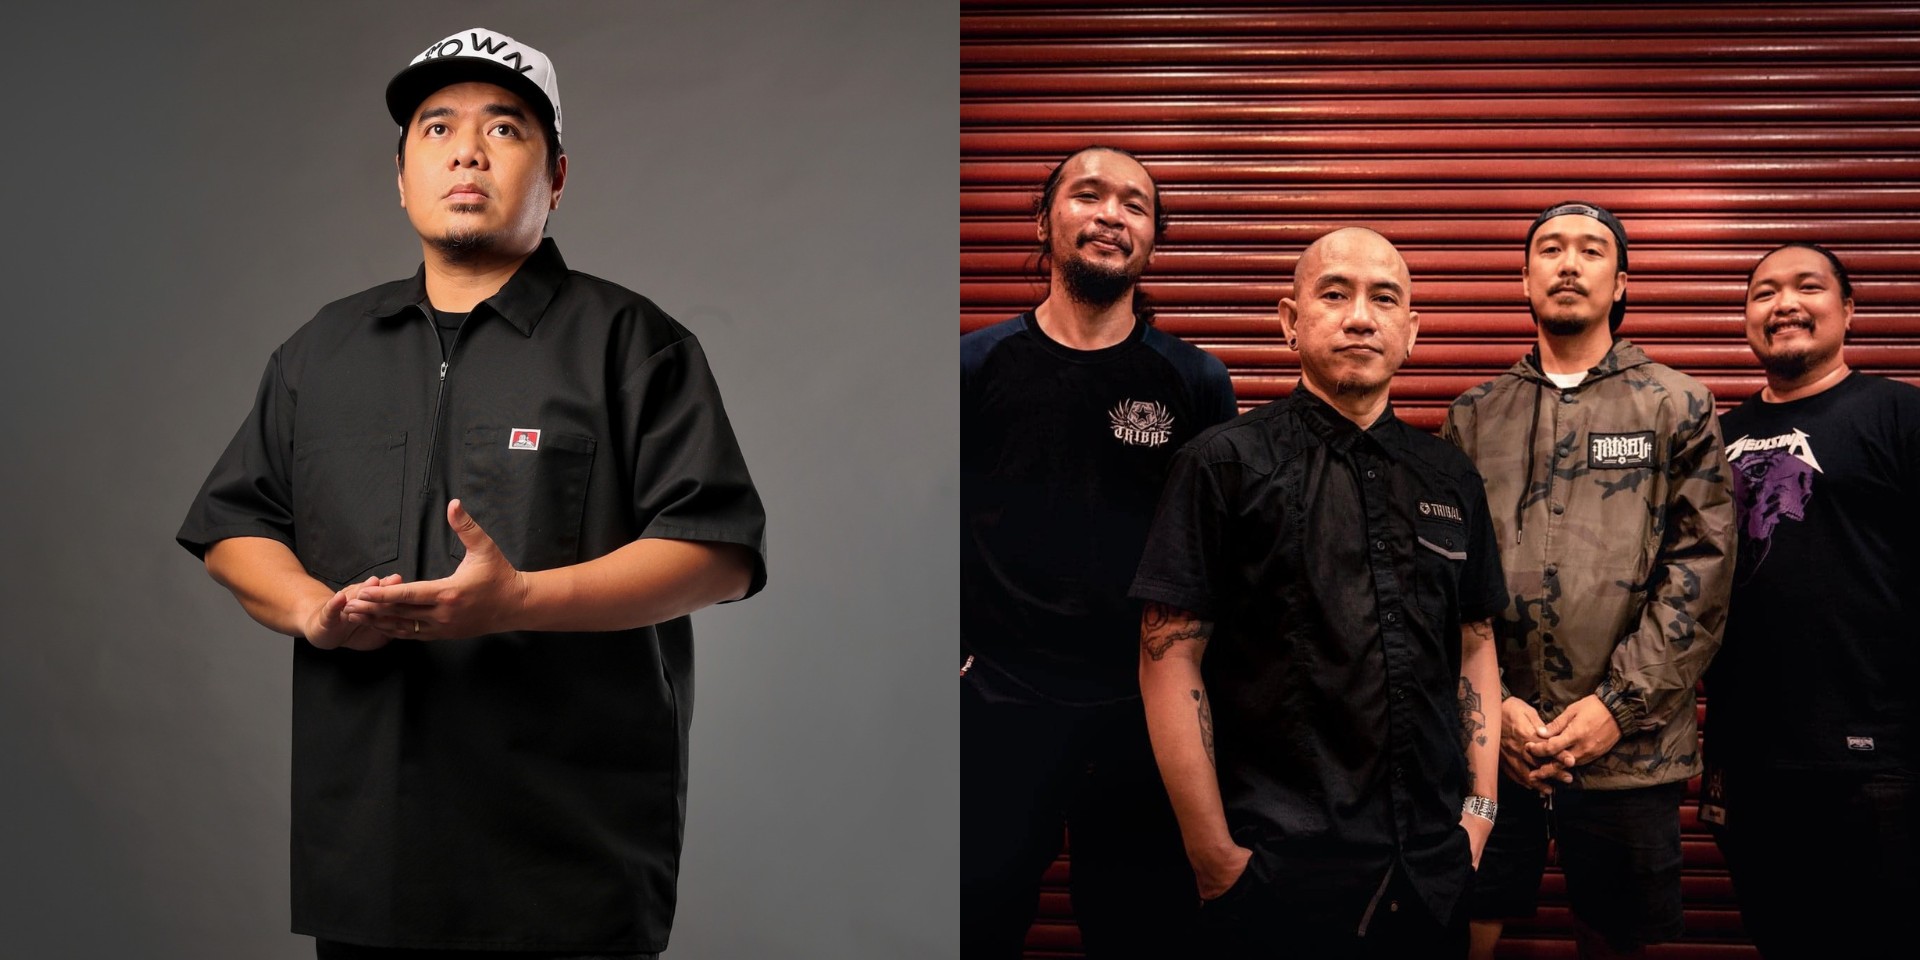 Gloc-9 and Greyhoundz celebrate 25 years in music with fundraising concert